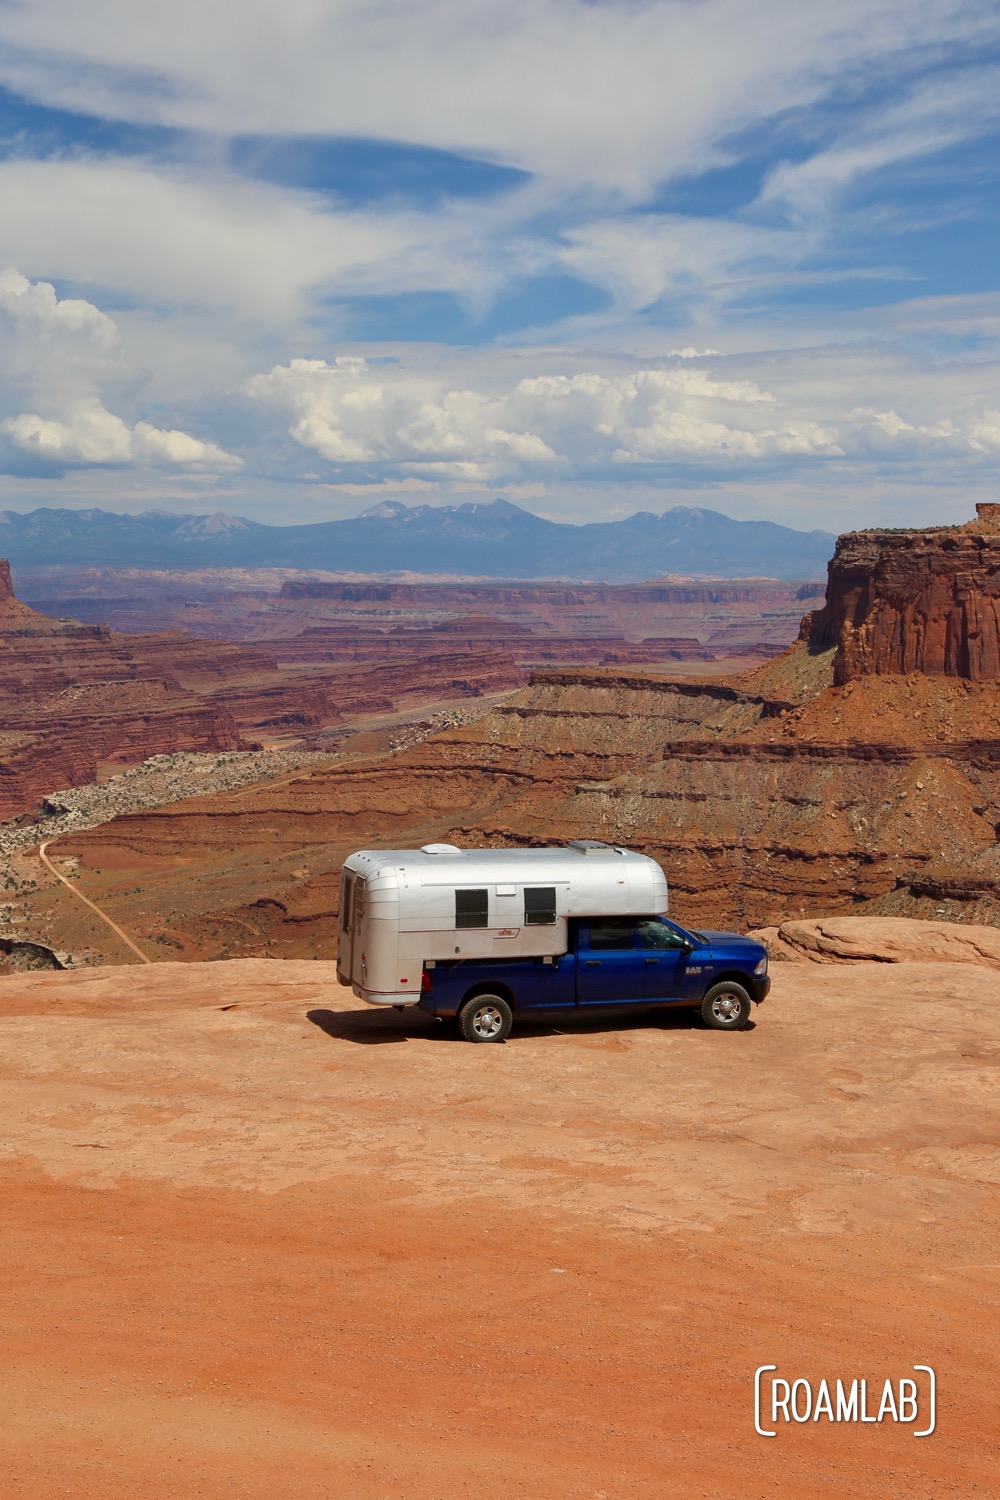 1970 Avion C11 truck camper parked on overlook in Canyonlands National Park